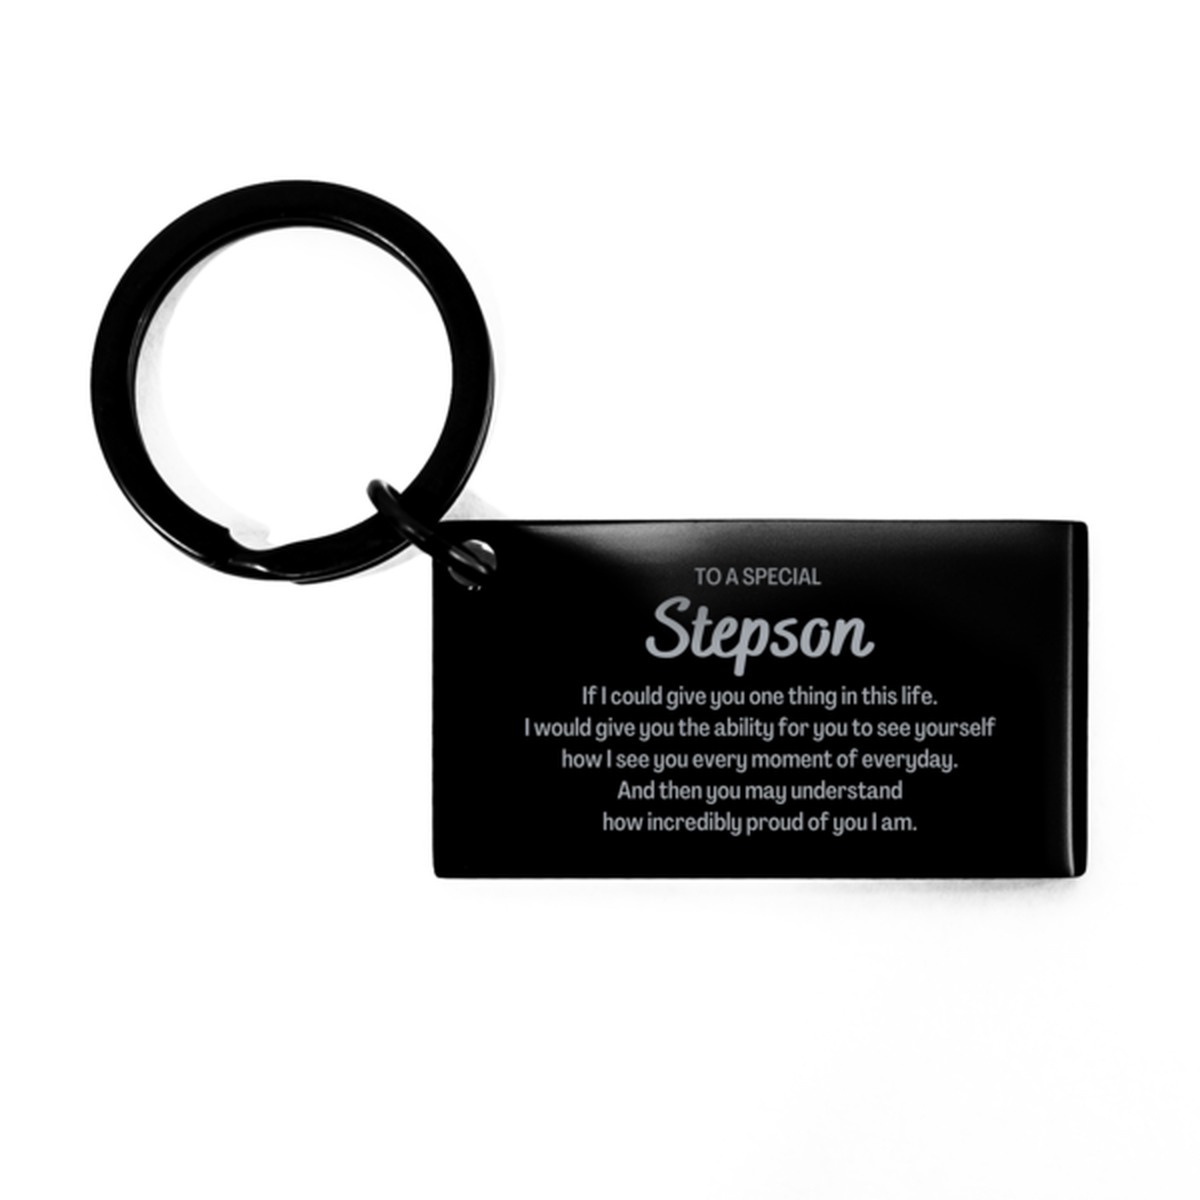 To My Stepson Keychain, Gifts For Stepson Engraved, Inspirational Gifts for Christmas Birthday, Epic Gifts for Stepson To A Special Stepson how incredibly proud of you I am